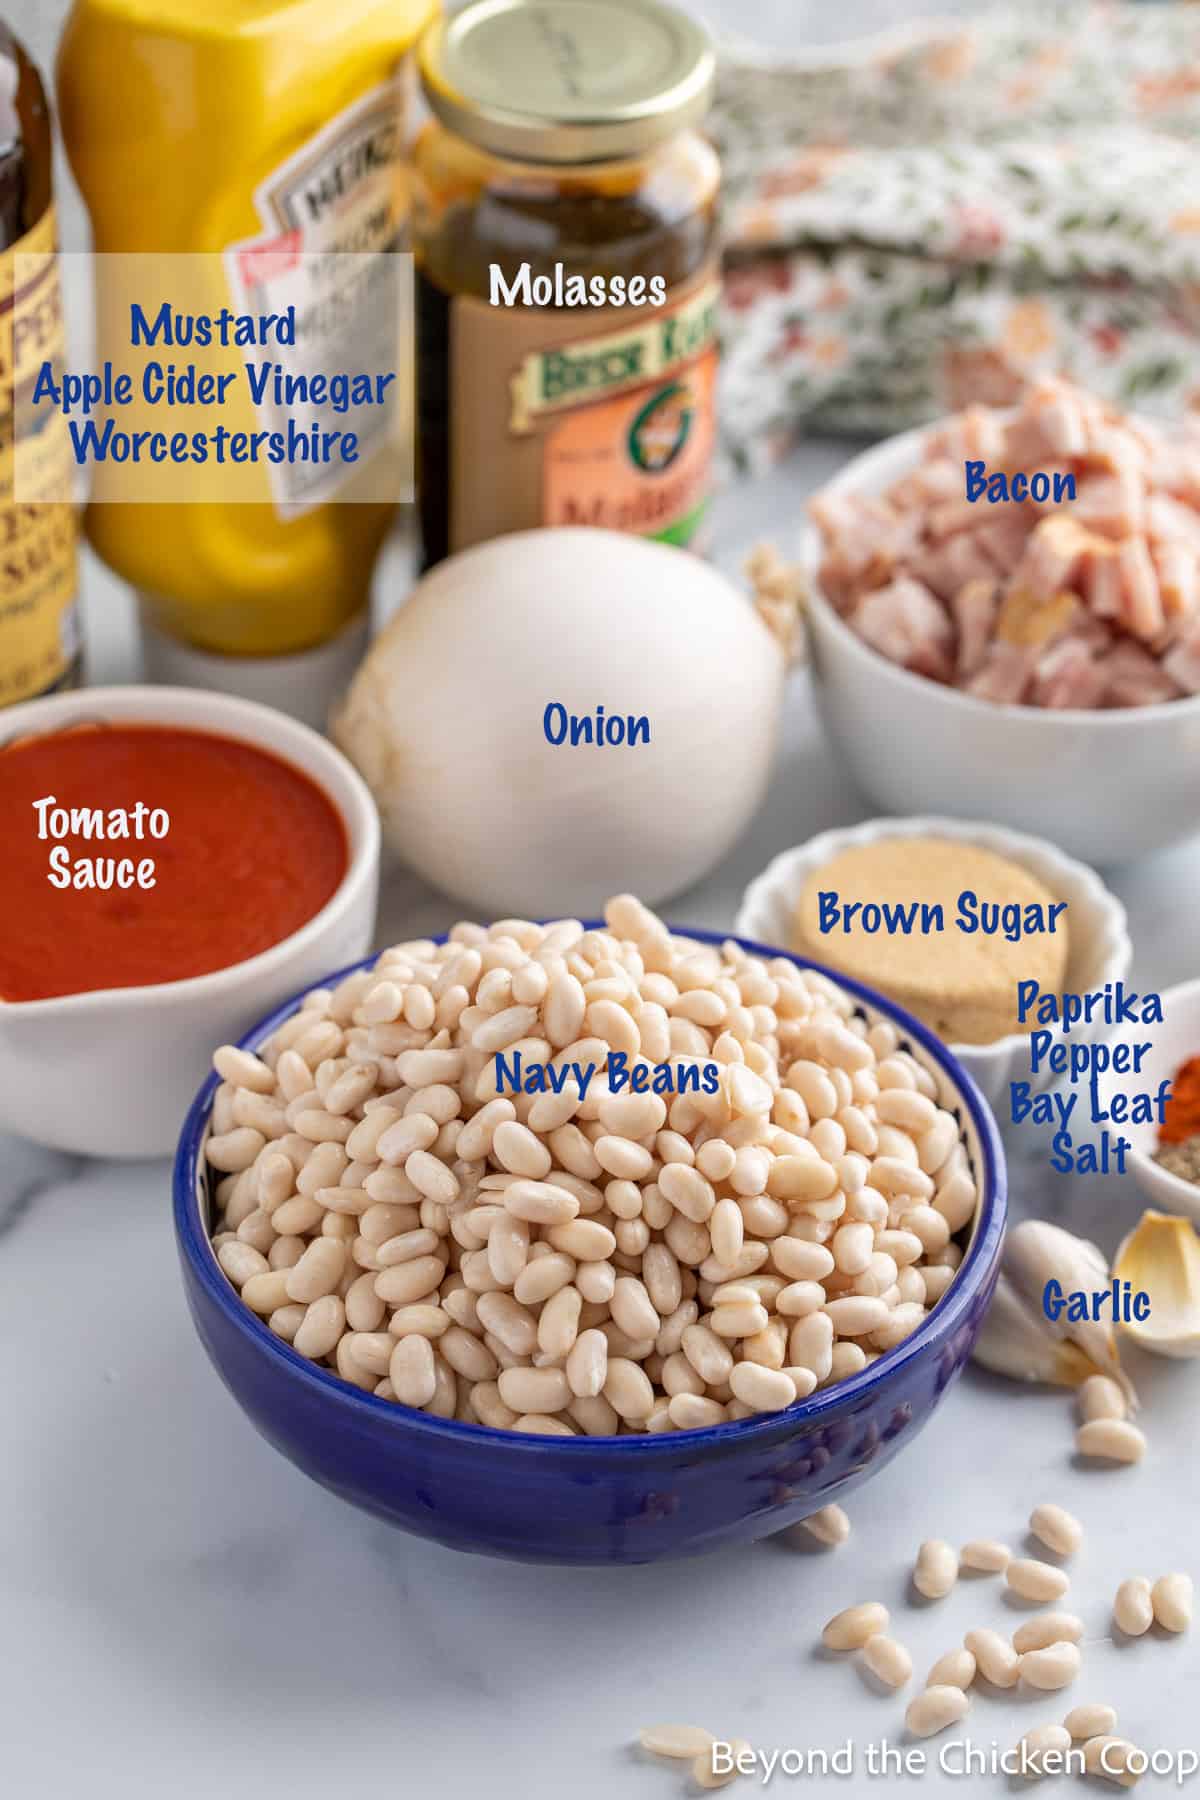 Ingredients for baked beans. 